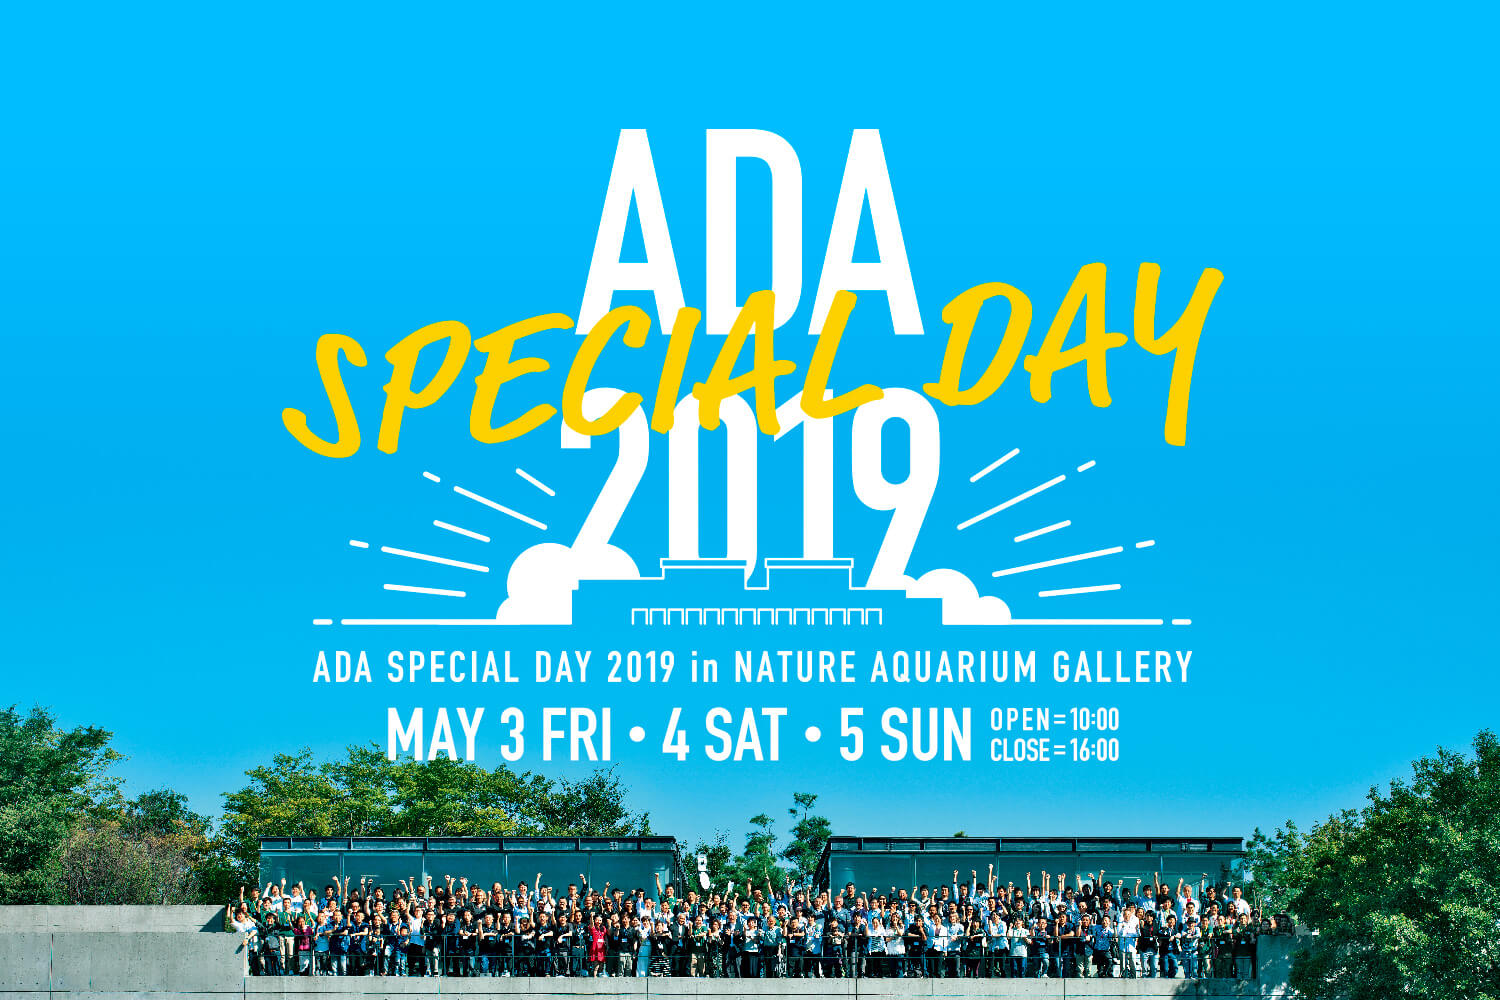 ADA SPECIAL DAY 2019